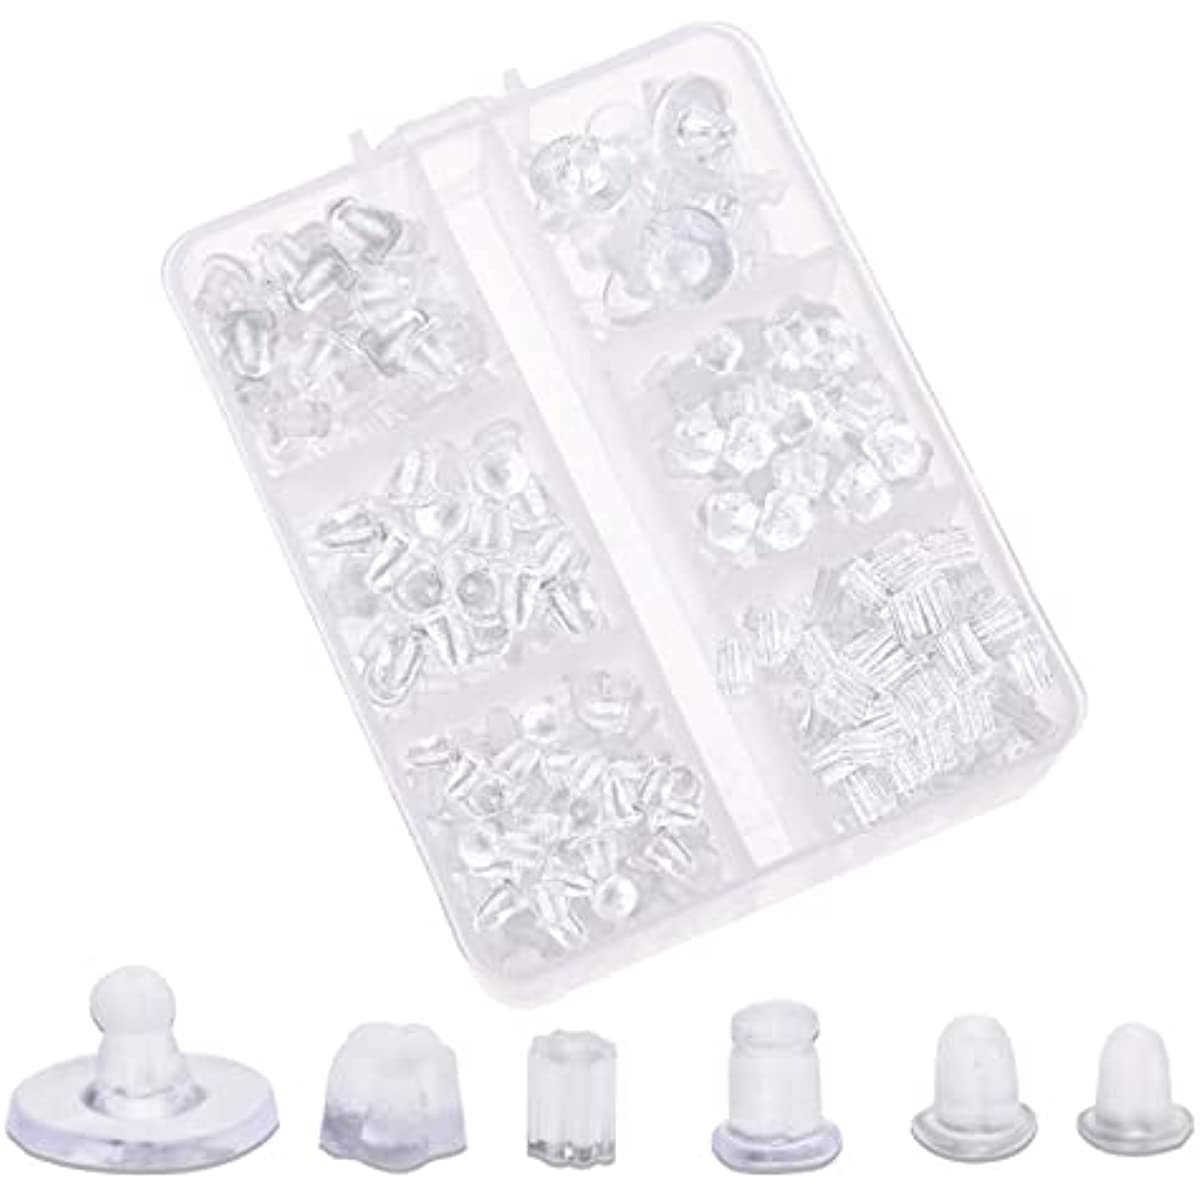 Nkwuire 4 Styles 620 Pcs Silicone Earring Backs for Studs, Clear Earring  Backings Hypoallergenic Plastic Rubber Earring Backs Bullet Clutch Stoppers